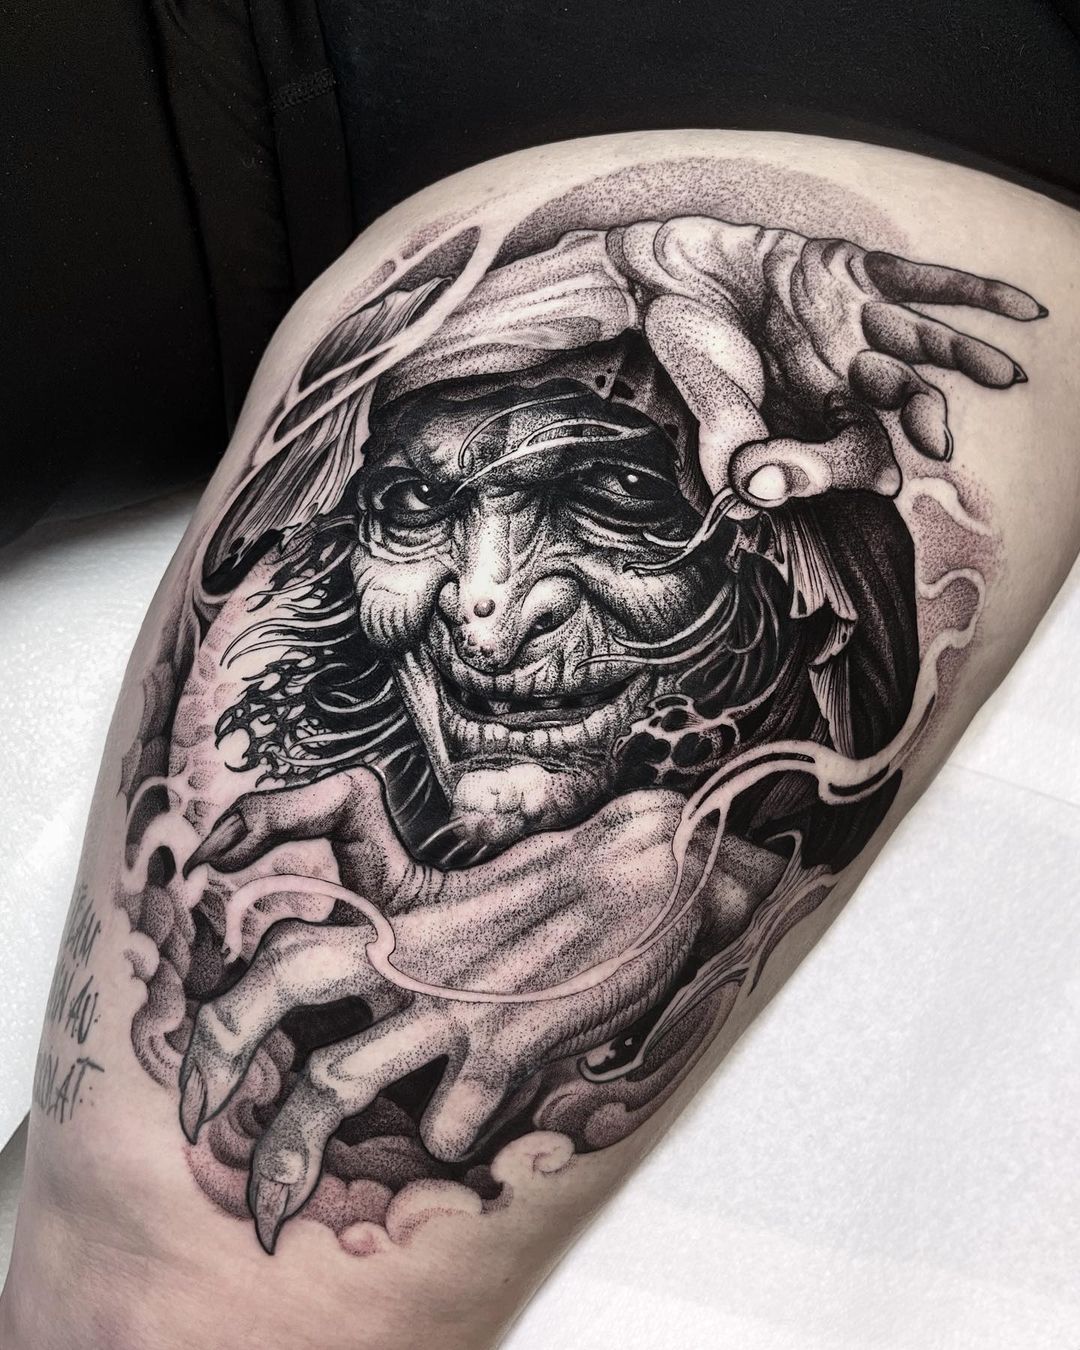 Dark and beautiful tattoos by Andre Fantini